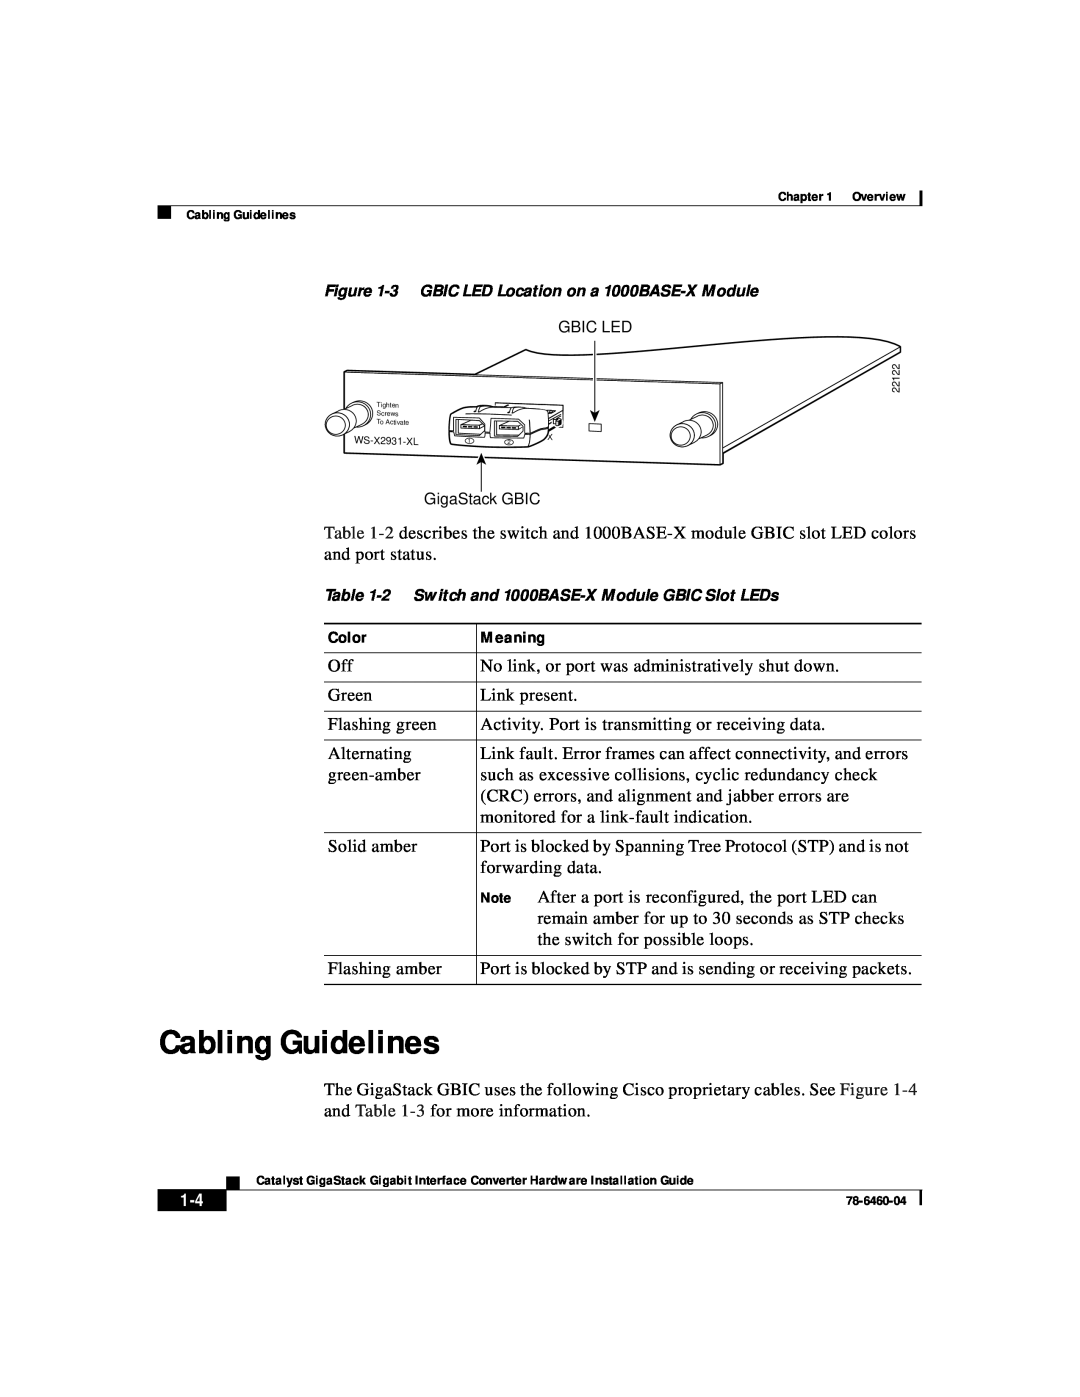 Cisco Systems WS-X3500-XL manual Cabling Guidelines, Color, Meaning, 3 GBIC LED Location on a 1000BASE-X Module 